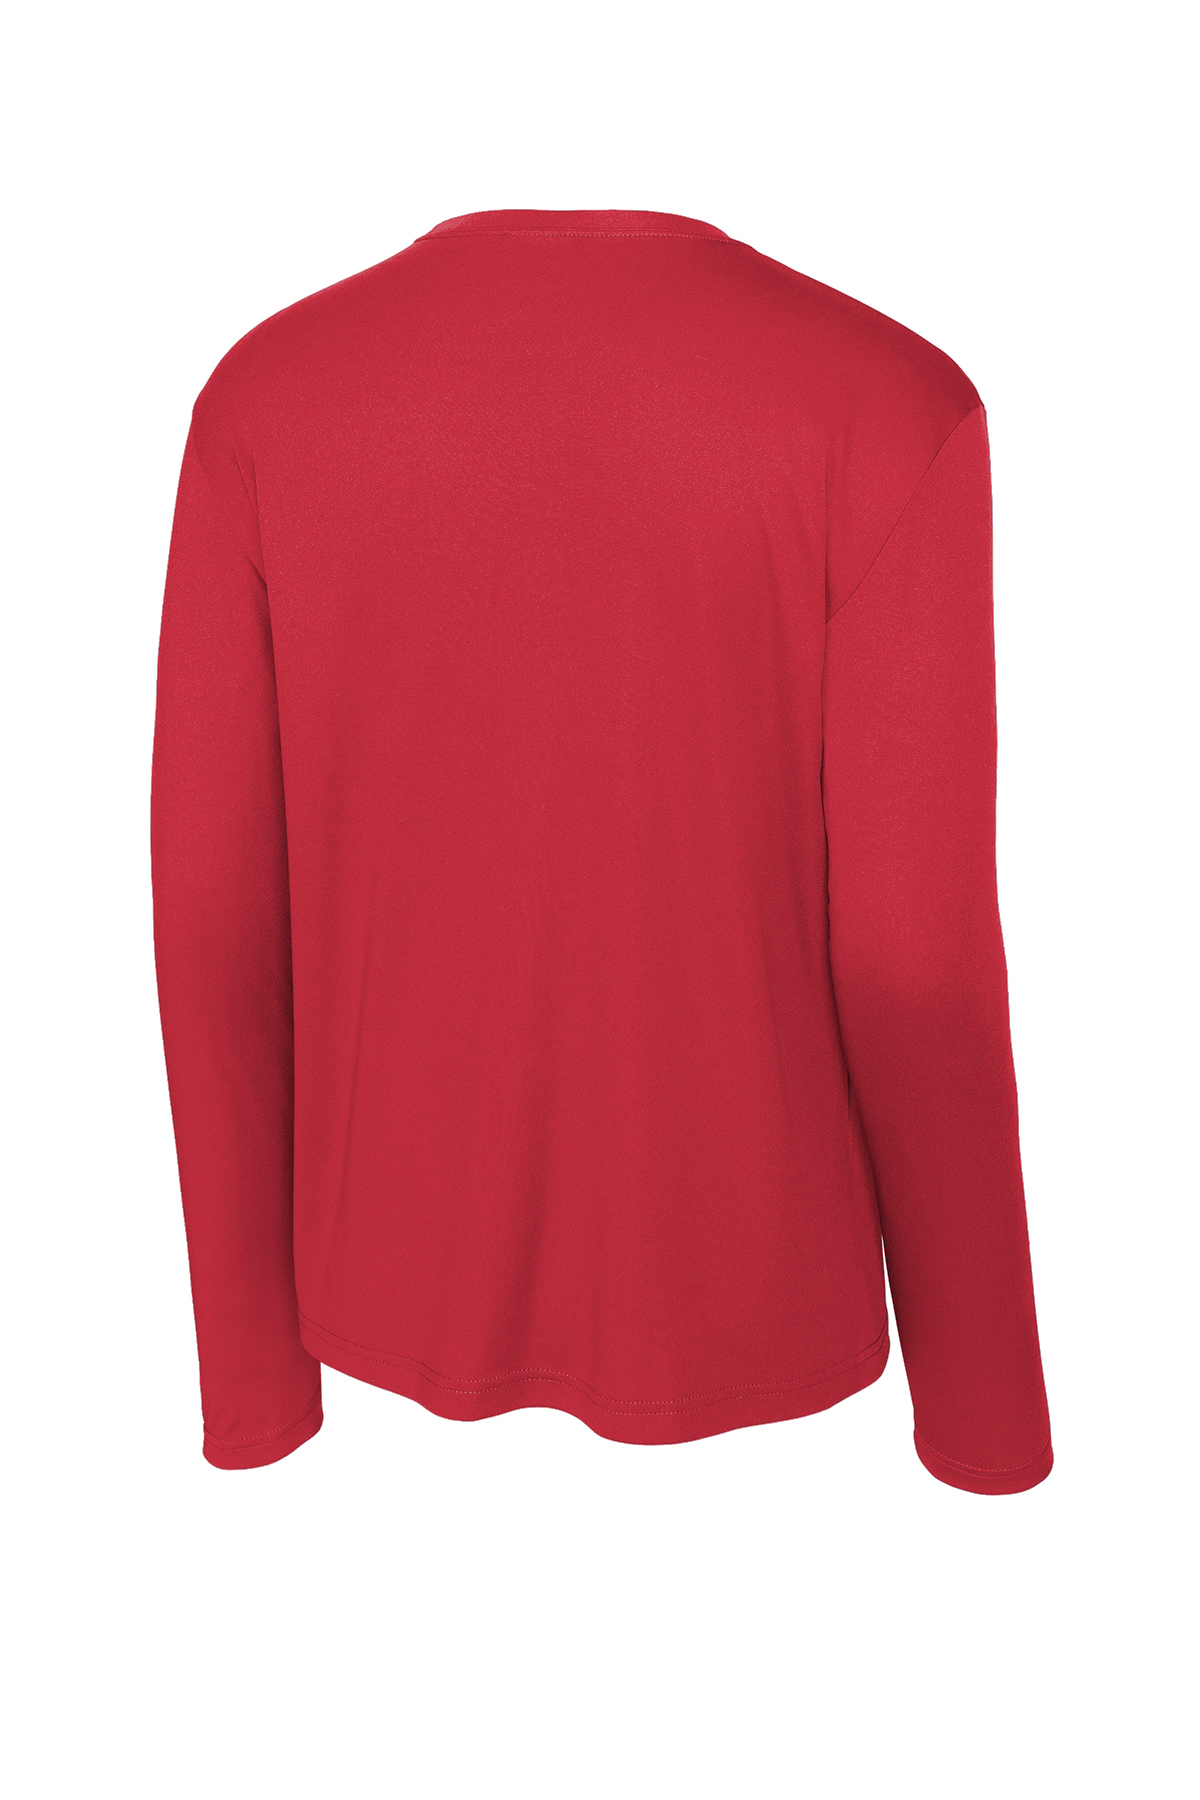 Blitz Tech Long Sleeve Tee, Heather - Red Card Red/White